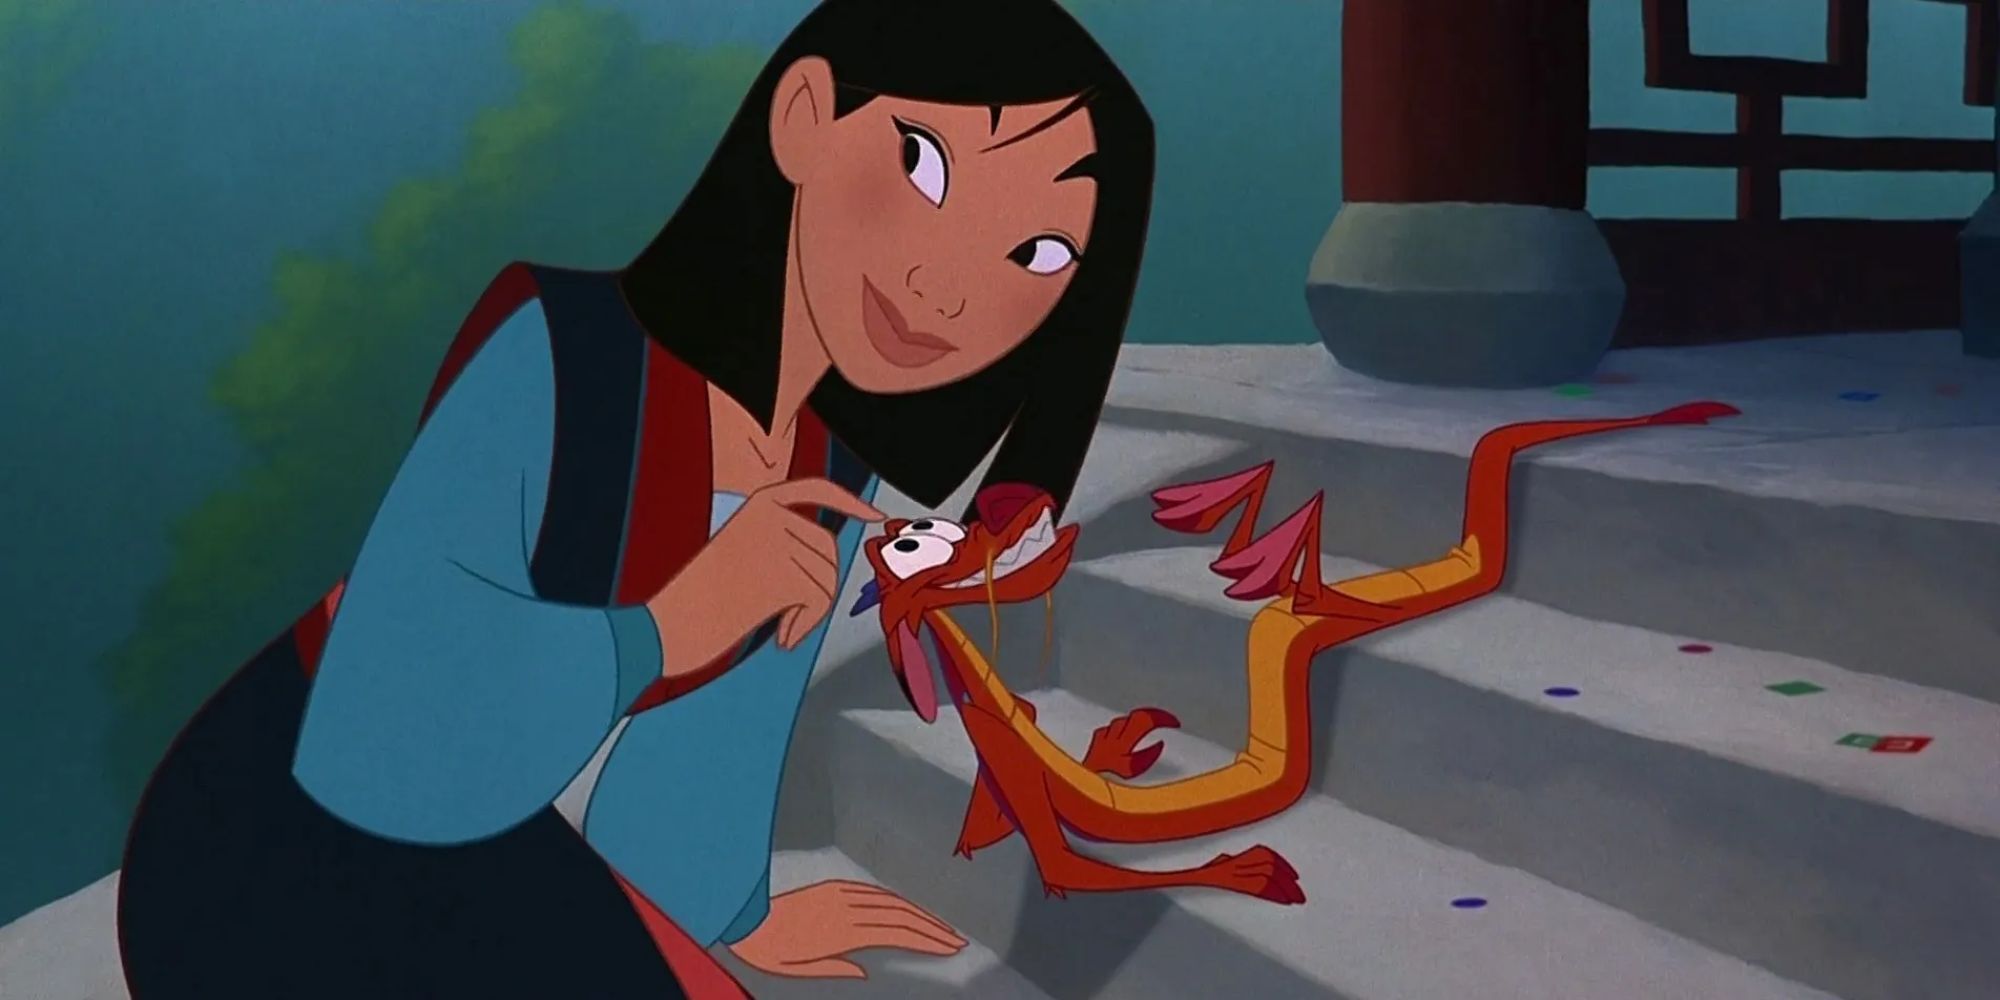 Mulan affectionately strokes Mushu's head as they lay on the steps of a shrine